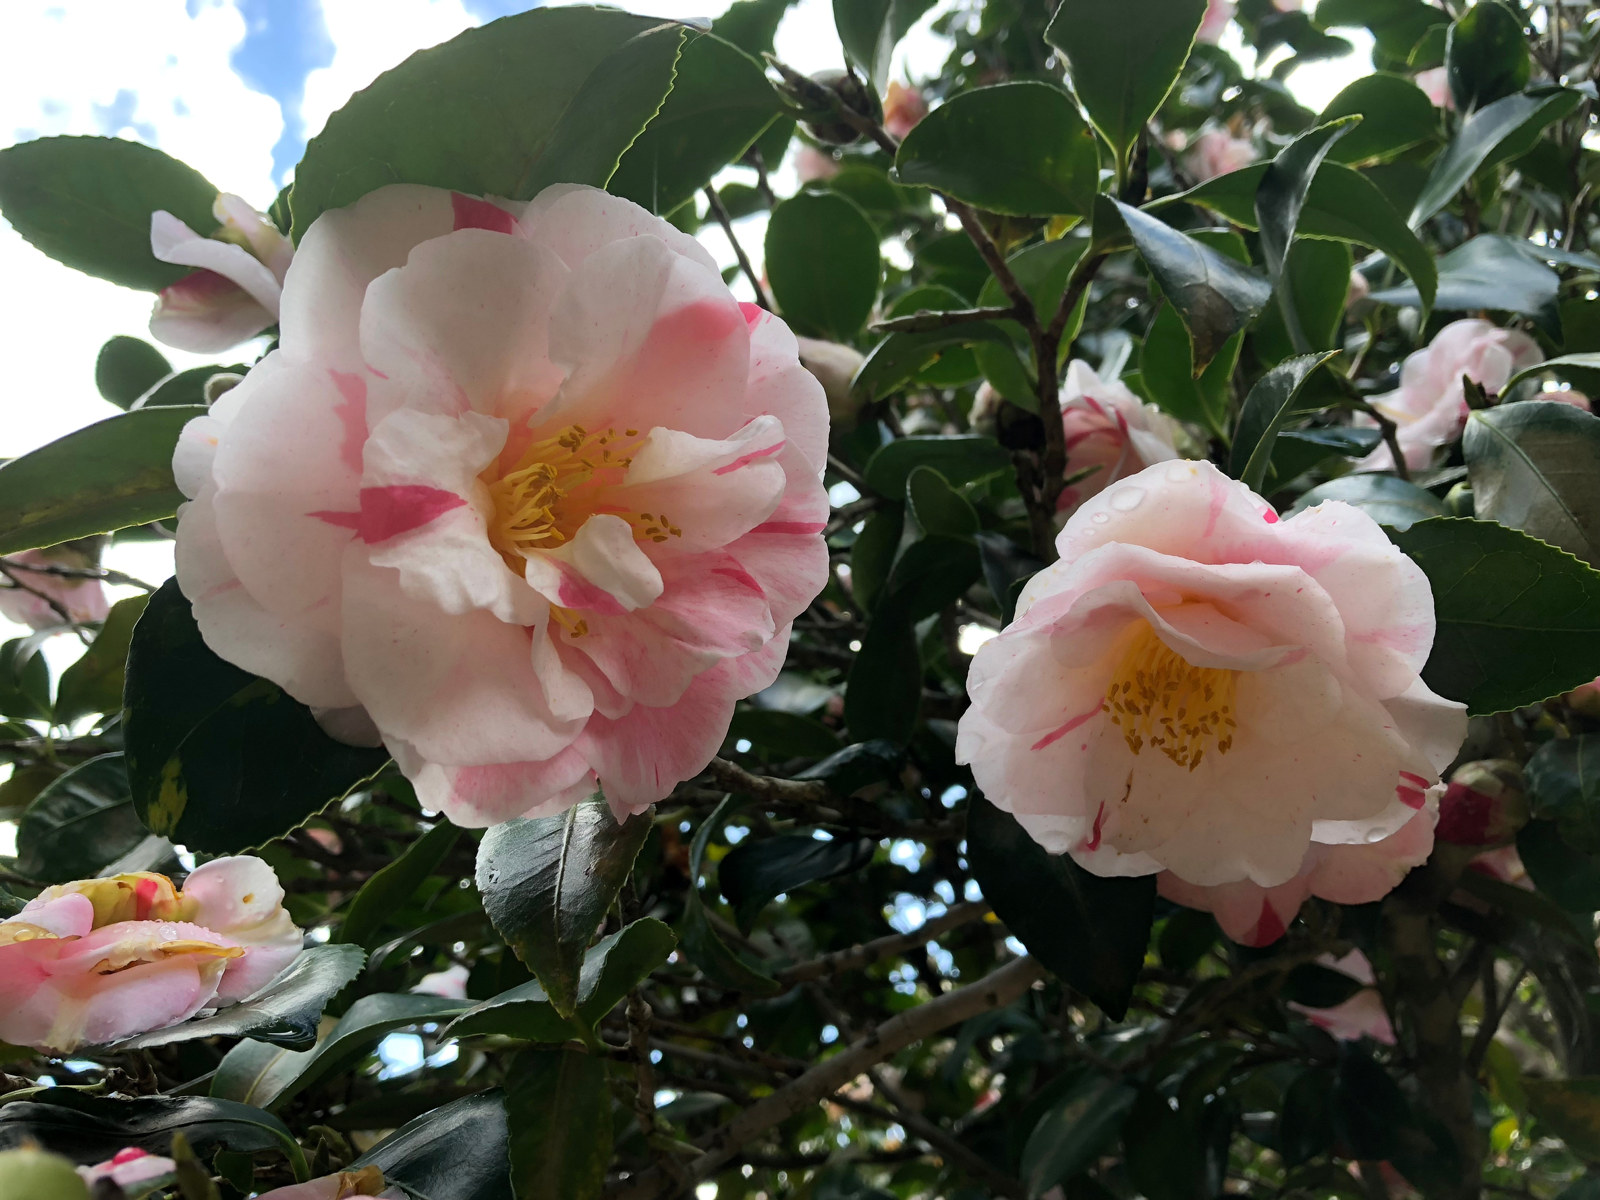 Camellia japonica 'Jean Lyne' in flower at Vaucluse House, showing flower patterning of pinks and whites.